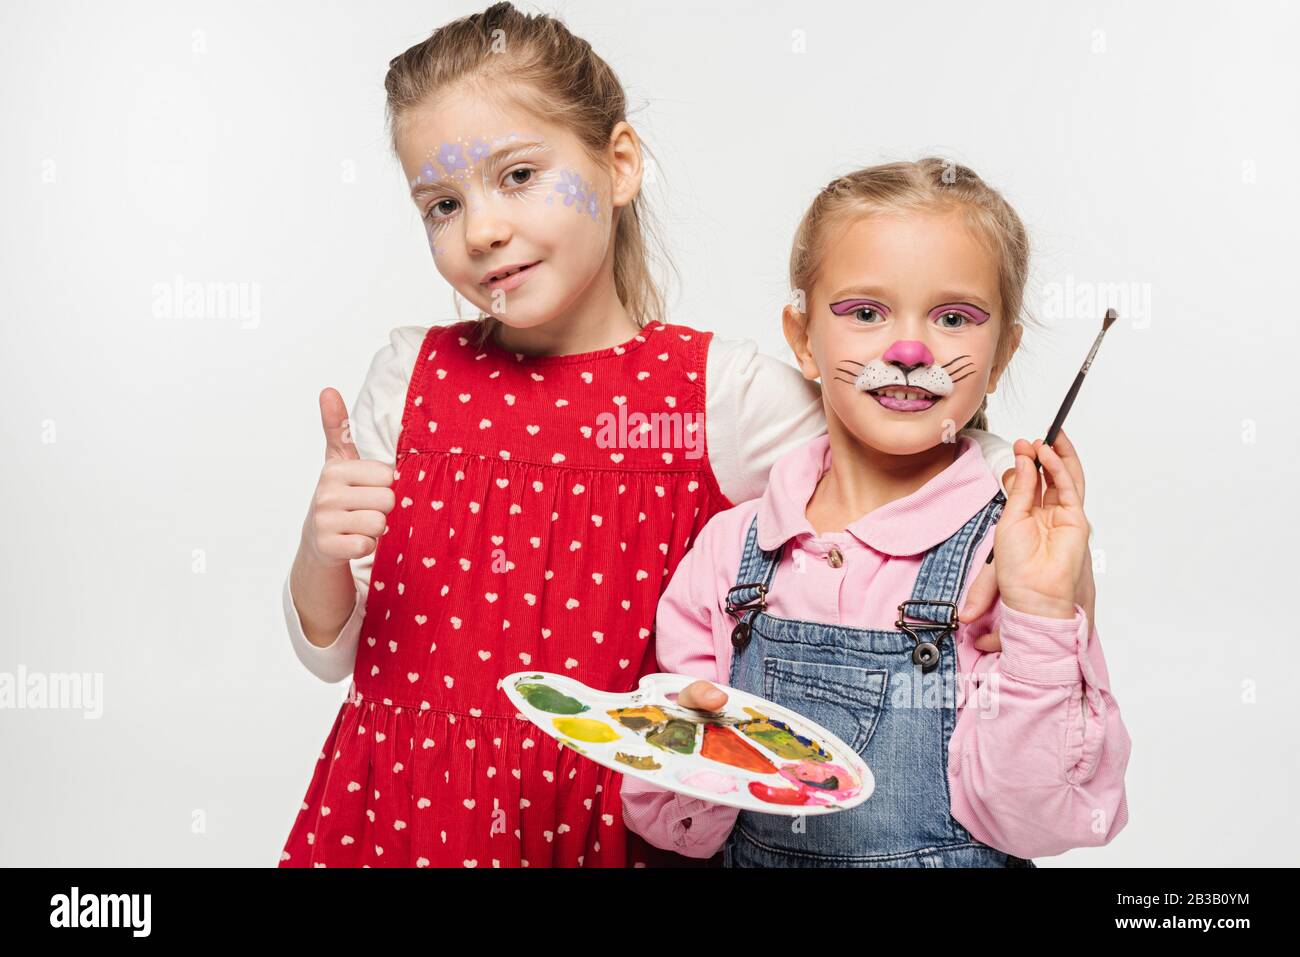 adorable kid with cat muzzle painting of face holding palette and paintbrush, while friend with floral mask showing thumb up isolated on white Stock Photo